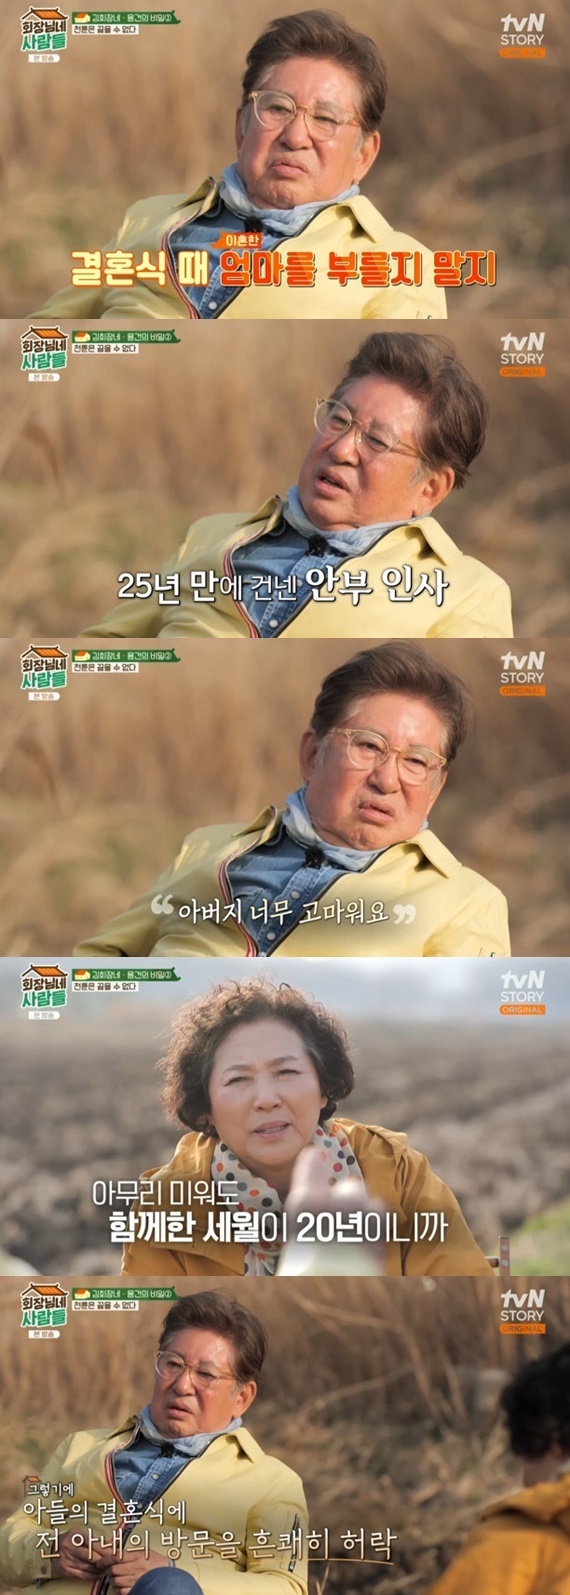 Actor Kim Yong-gun said he met his ex-wife in 25 years at his sons wedding ceremony at Chairpersons People.In the TVN STORY entertainment program Chairpersons people broadcasted on the afternoon of the 22nd, Go Doo-shim, who played Chairpersons first daughter-in-law Park Eun-young in Country DiariesKim Yong-gun and Go Doo-shim in the Country Diaries came together to catch up.Kim Yong-gun said that the former Wife and Go Doo-shim are the same, and that he met the former Wife in 25 years at the Second Son Wedding ceremony.Kim Yong-gun said, When I got married for the second time, the kids asked me. Kim Yong-gun said, How are you doing?Its been a long time, Second heard about it and said thank you to me the next day. Kim Yong-gun then laughed at Go Doo-shim, saying, Sit down on both sides, asking Go Doo-shim to attend the wedding ceremony of his first son, actor Ha Jung-woo (real name Kim Sung-hoon) with his ex-wife.On the other hand, tvN STORY Chairpersons people is an entertainment program that depicts what happens when the people of Kim Chairperson, who made the house theater cry and laugh 20 years ago, such as Kim Yong-gun, Kim Soo-mi, It is broadcasted every Monday at 8:20 pm.